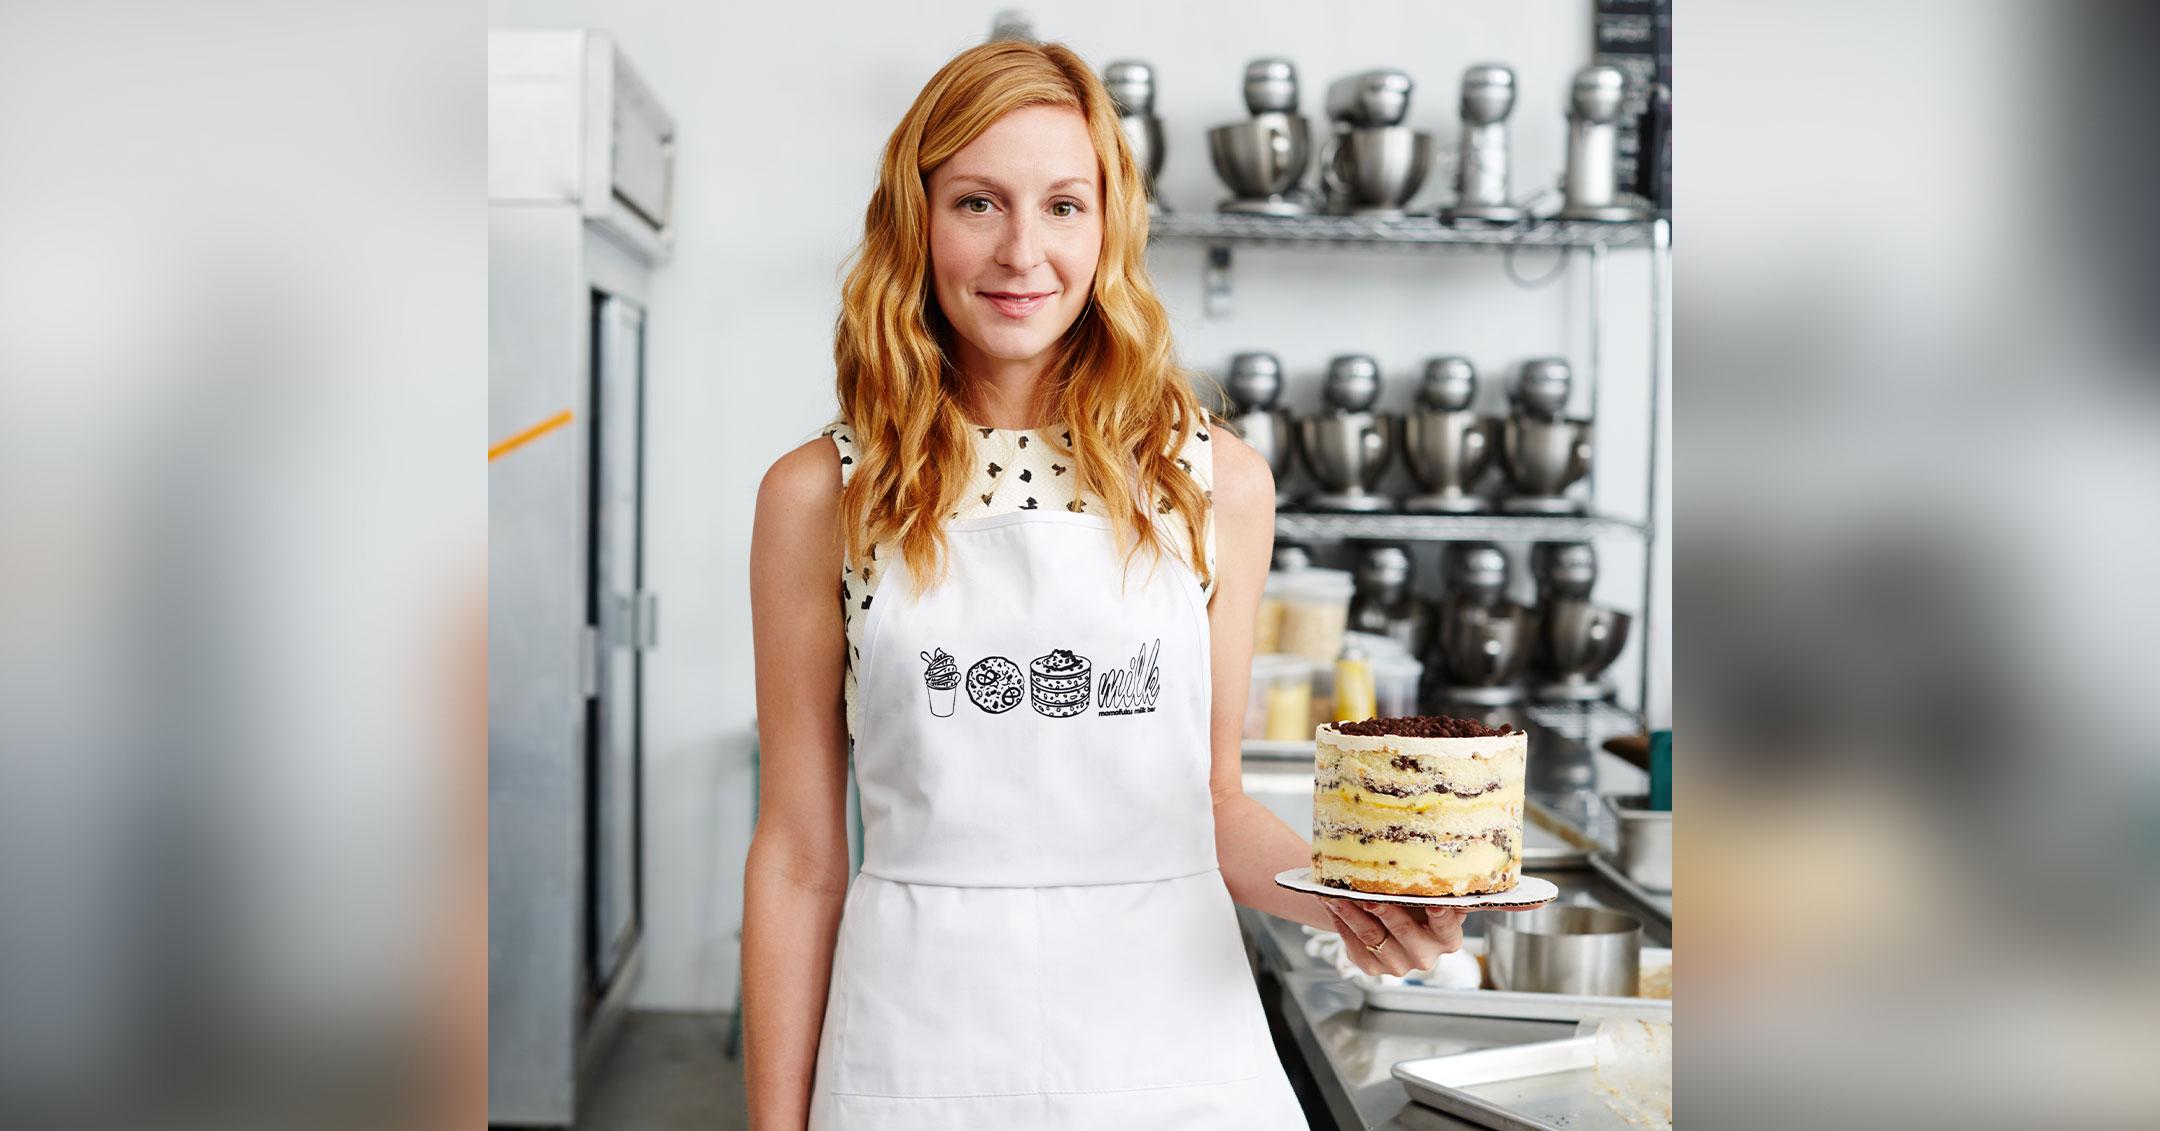 Christina Tosi of Milk Bar reveals her favorite NYC bakeries and go-to  holiday gifts